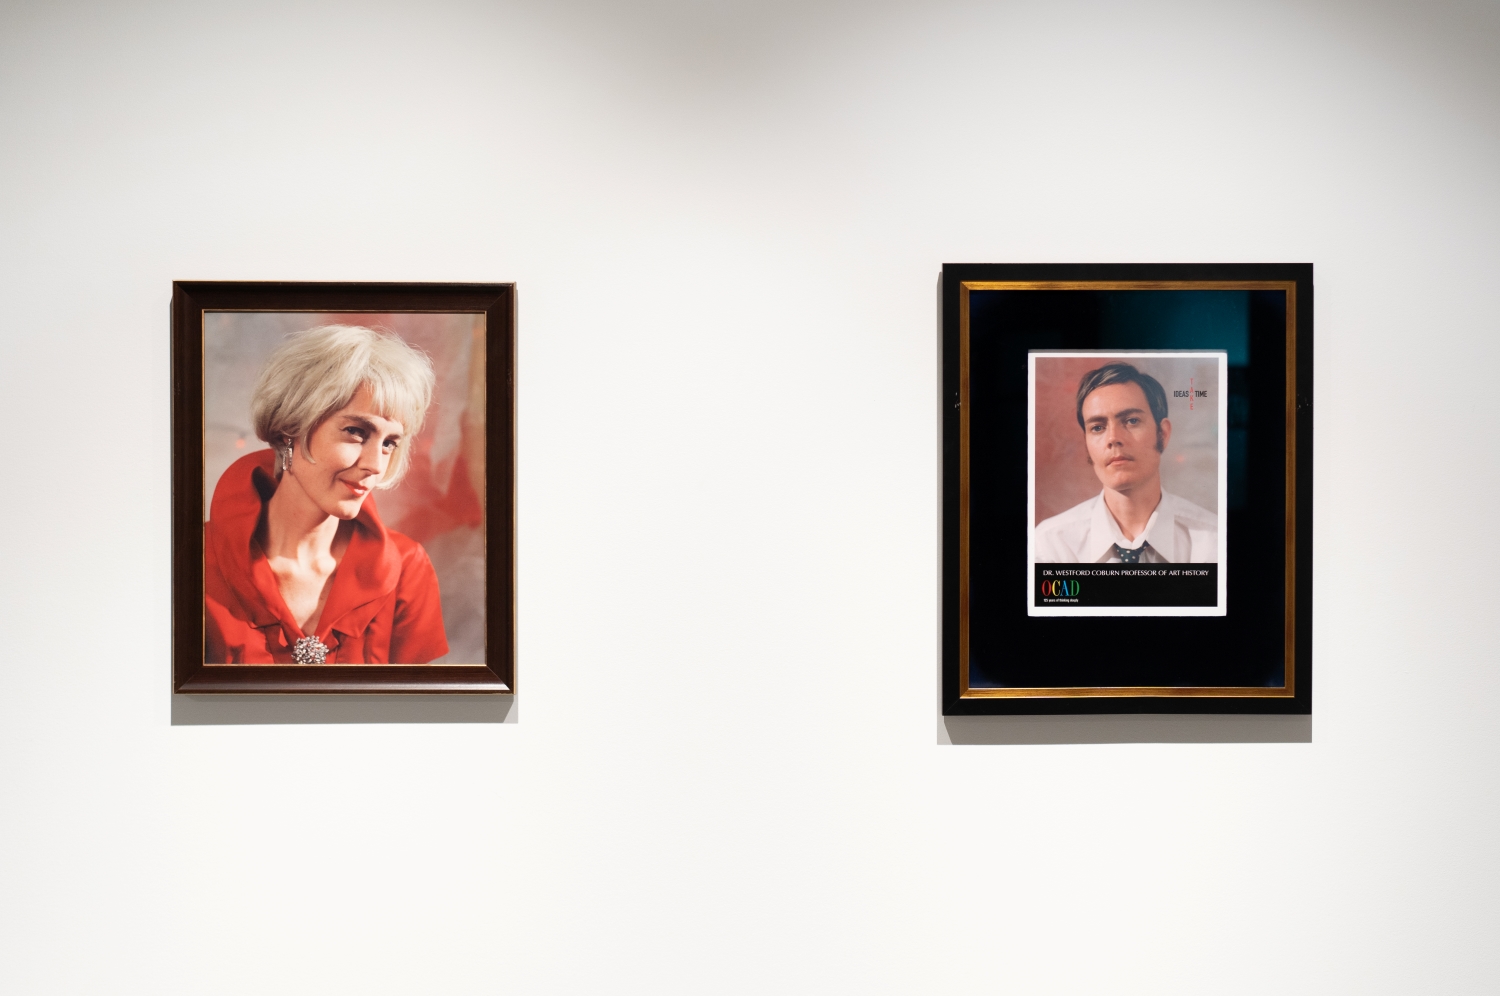 Installation view: Wendy Coburn Fable for Tomorrow, left photograph is a person with blonde hair and red shirt, right photograph, the left photograph is of a person with short brown hair, wearing a white shirt and tie.